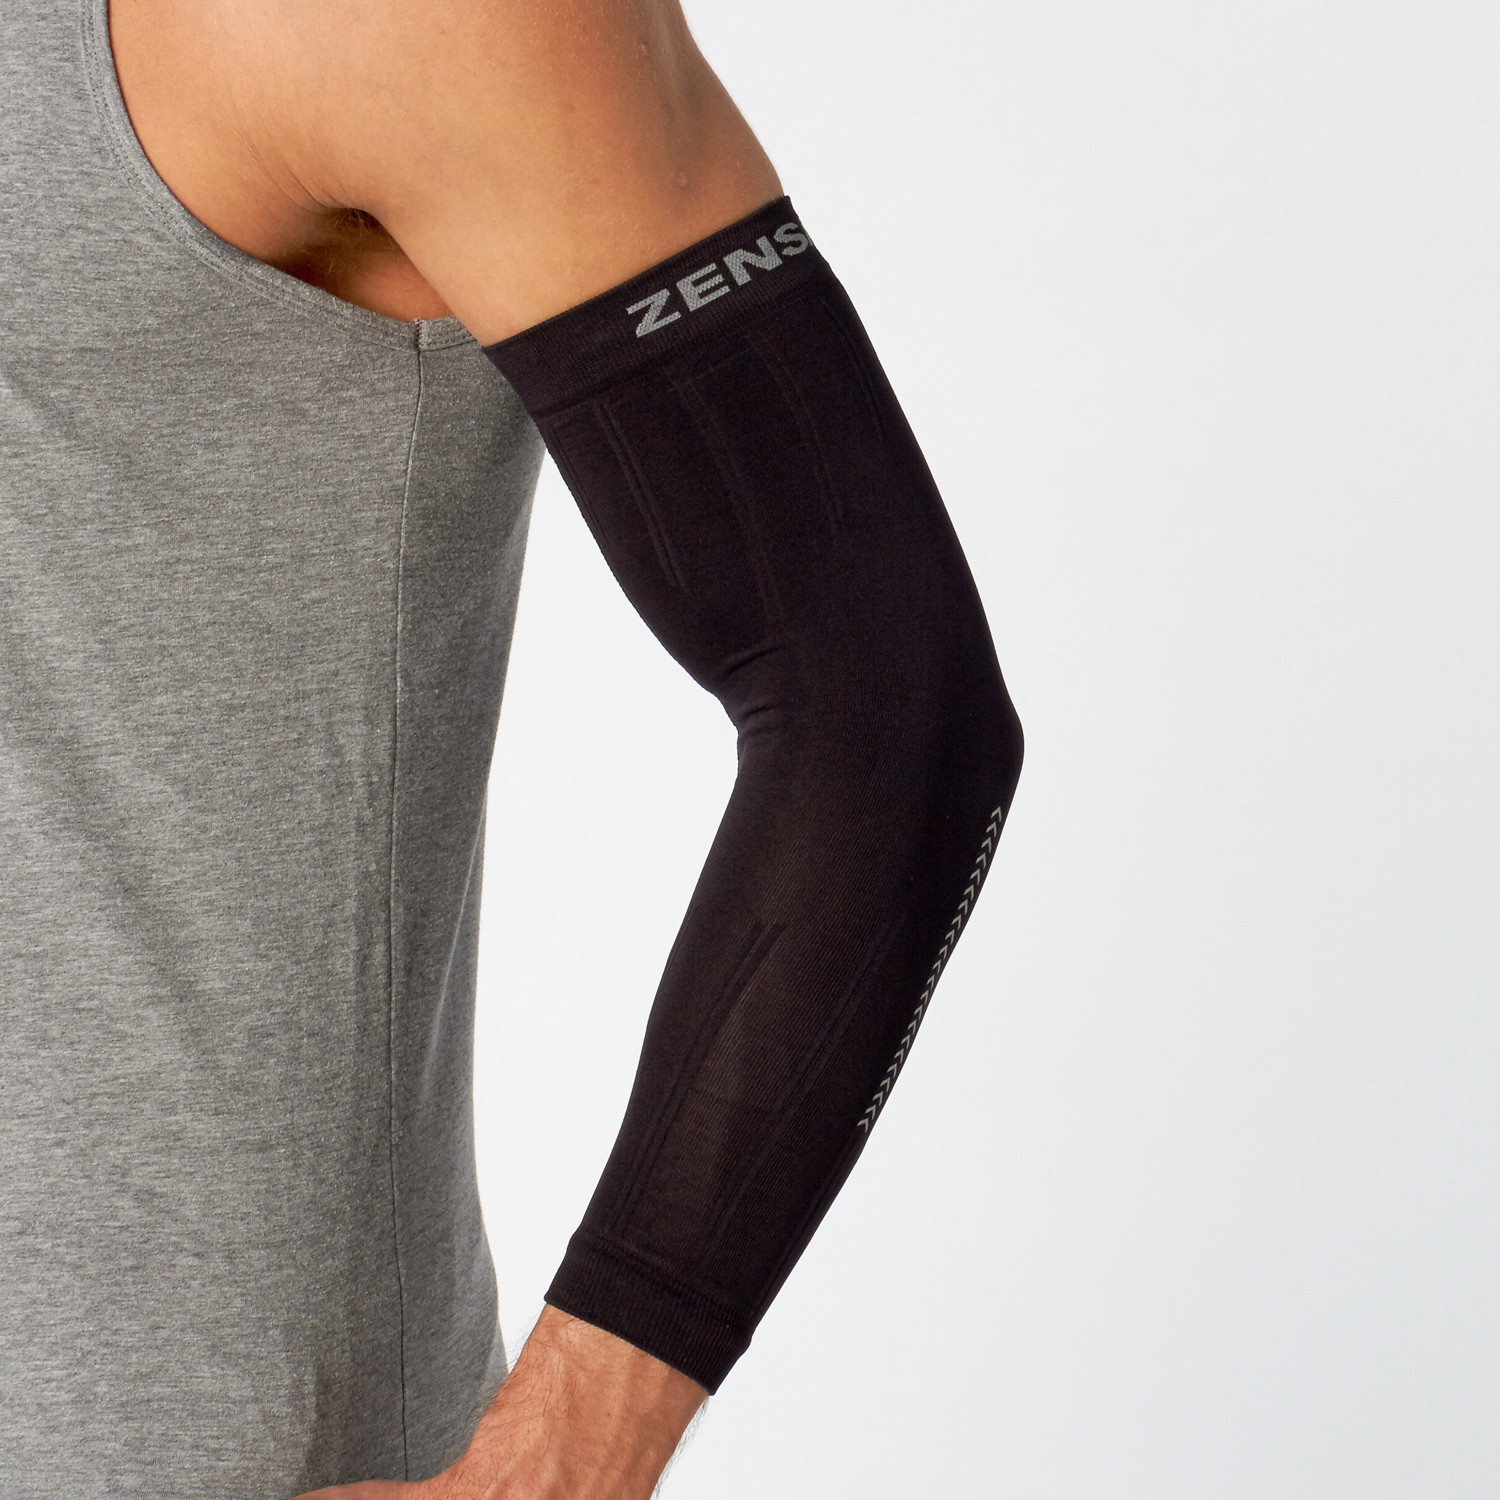 Reflect Compression Arm Sleeves // Black (L/XL) - Zensah - Touch of Modern